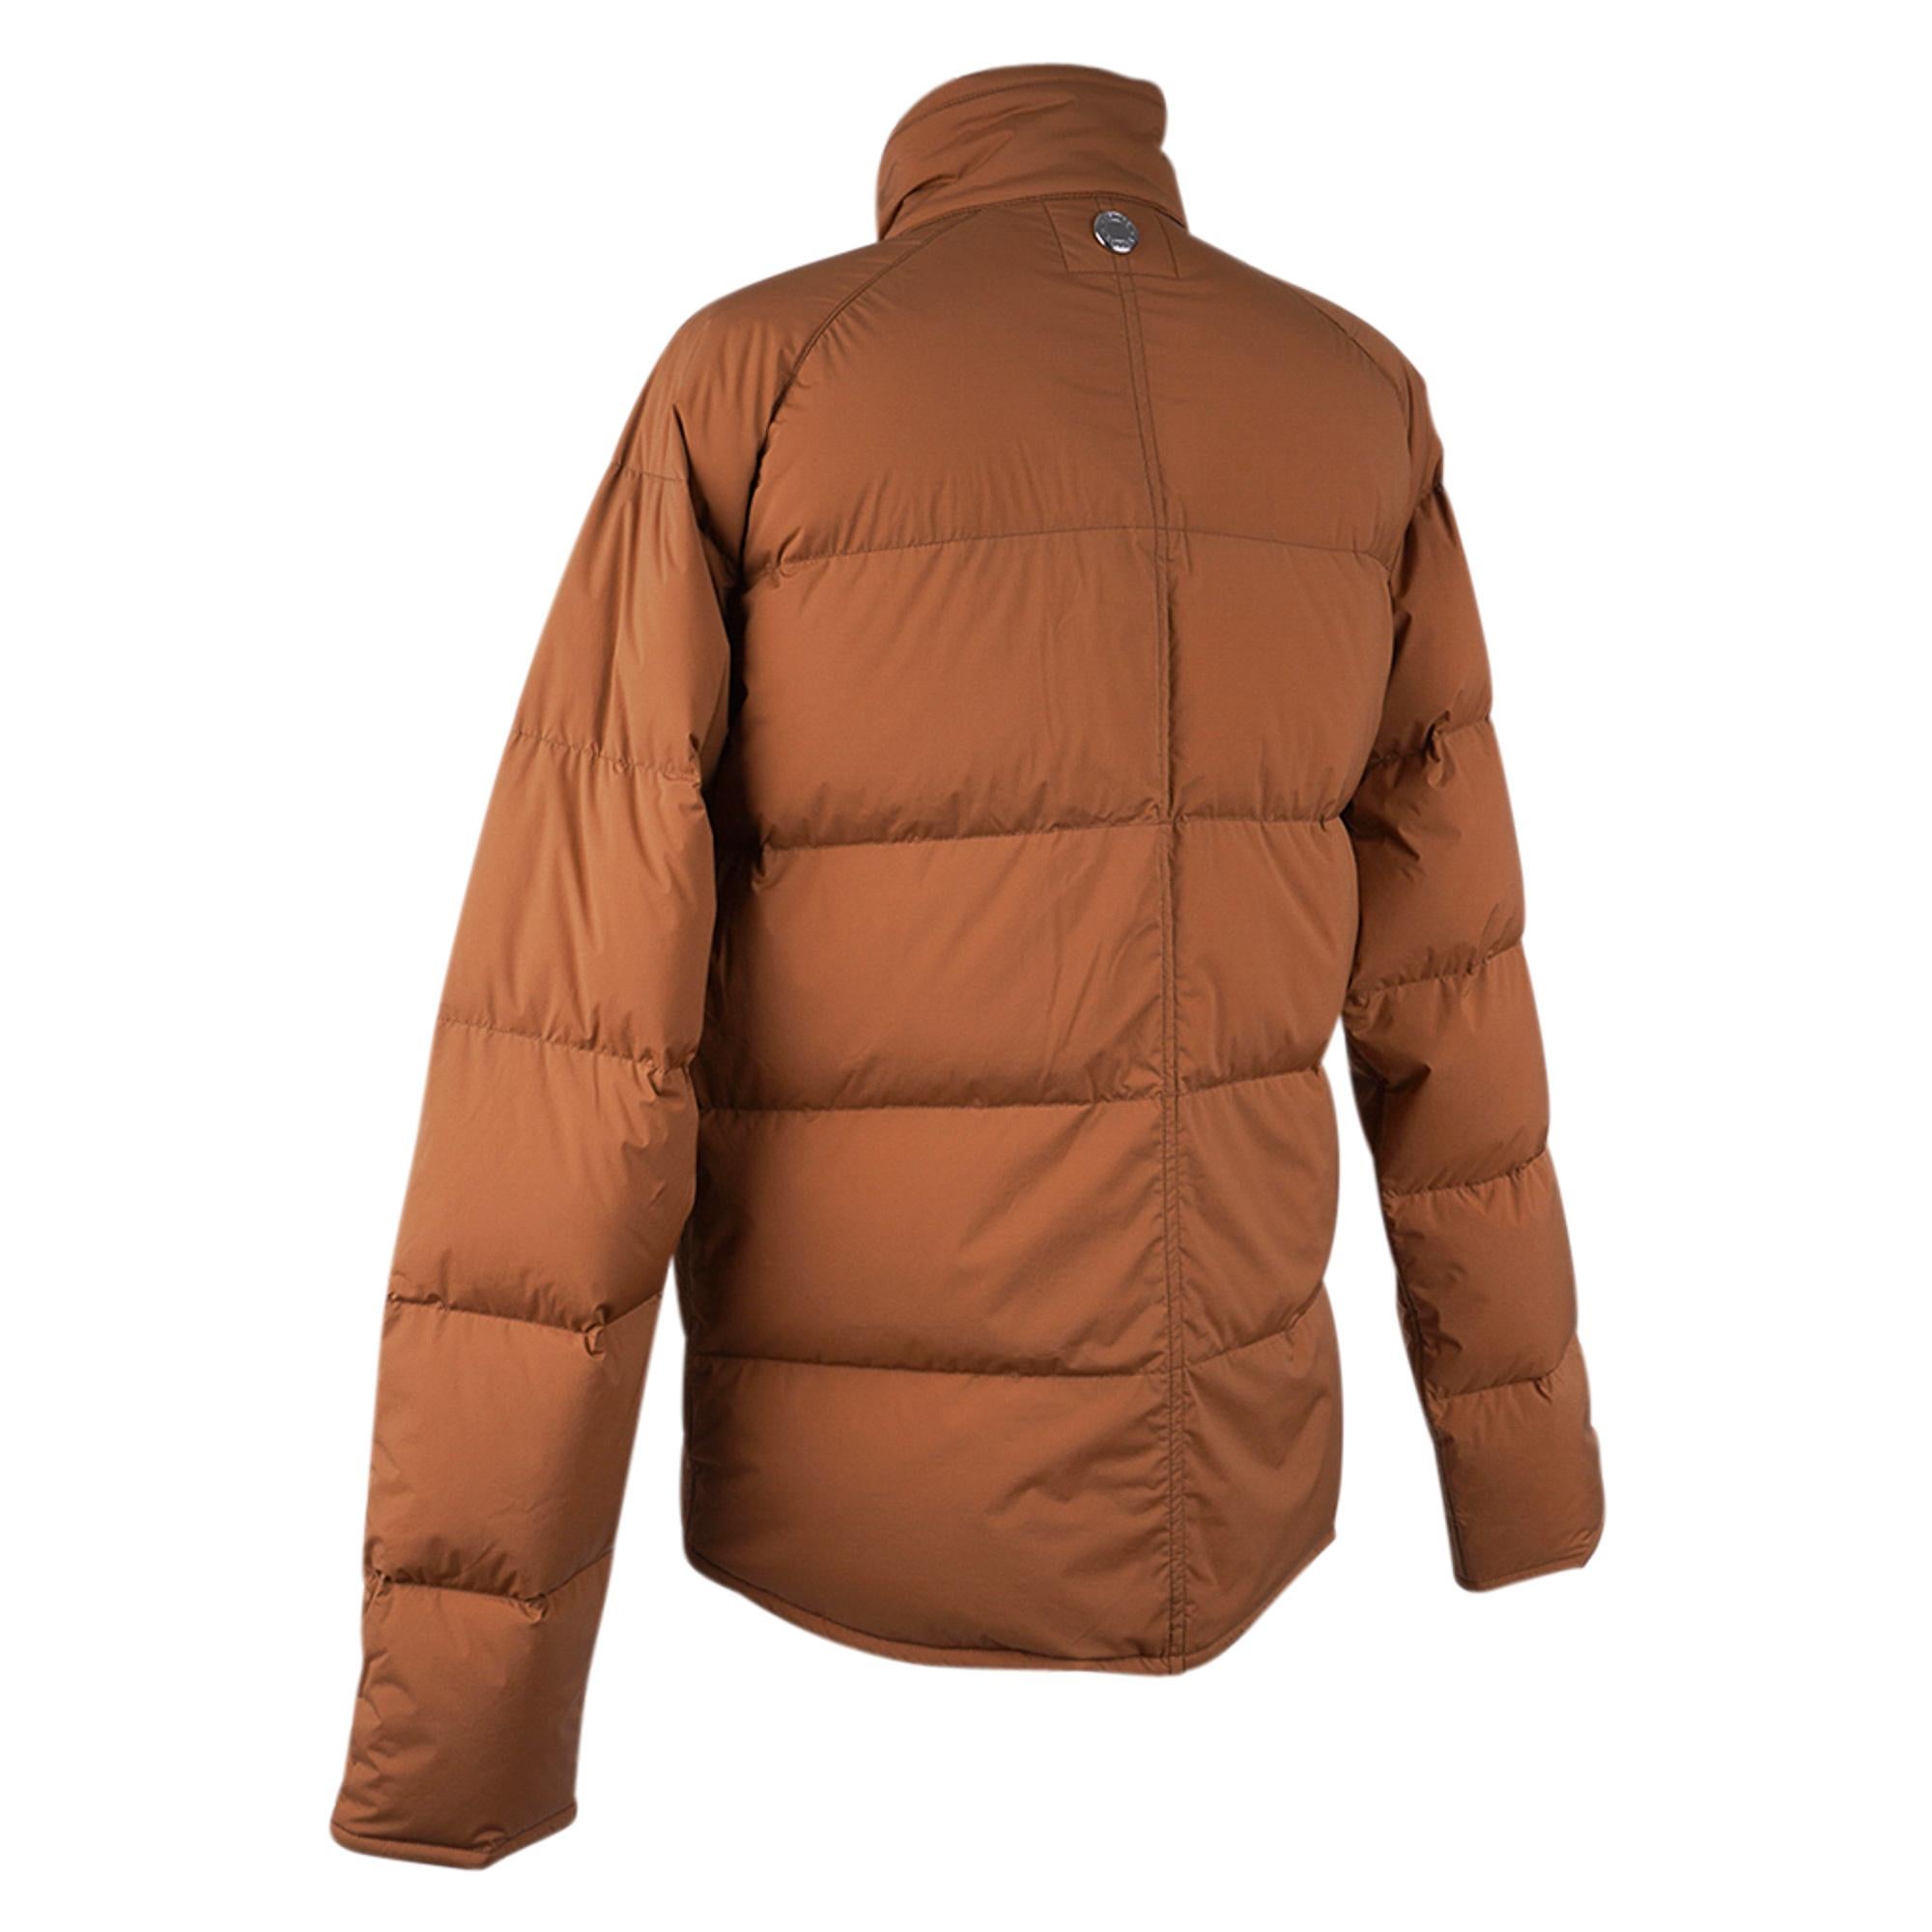 Hermes Men's Piumino Extra-Light Puffer Coat / Jacket Fauve M In New Condition For Sale In Miami, FL